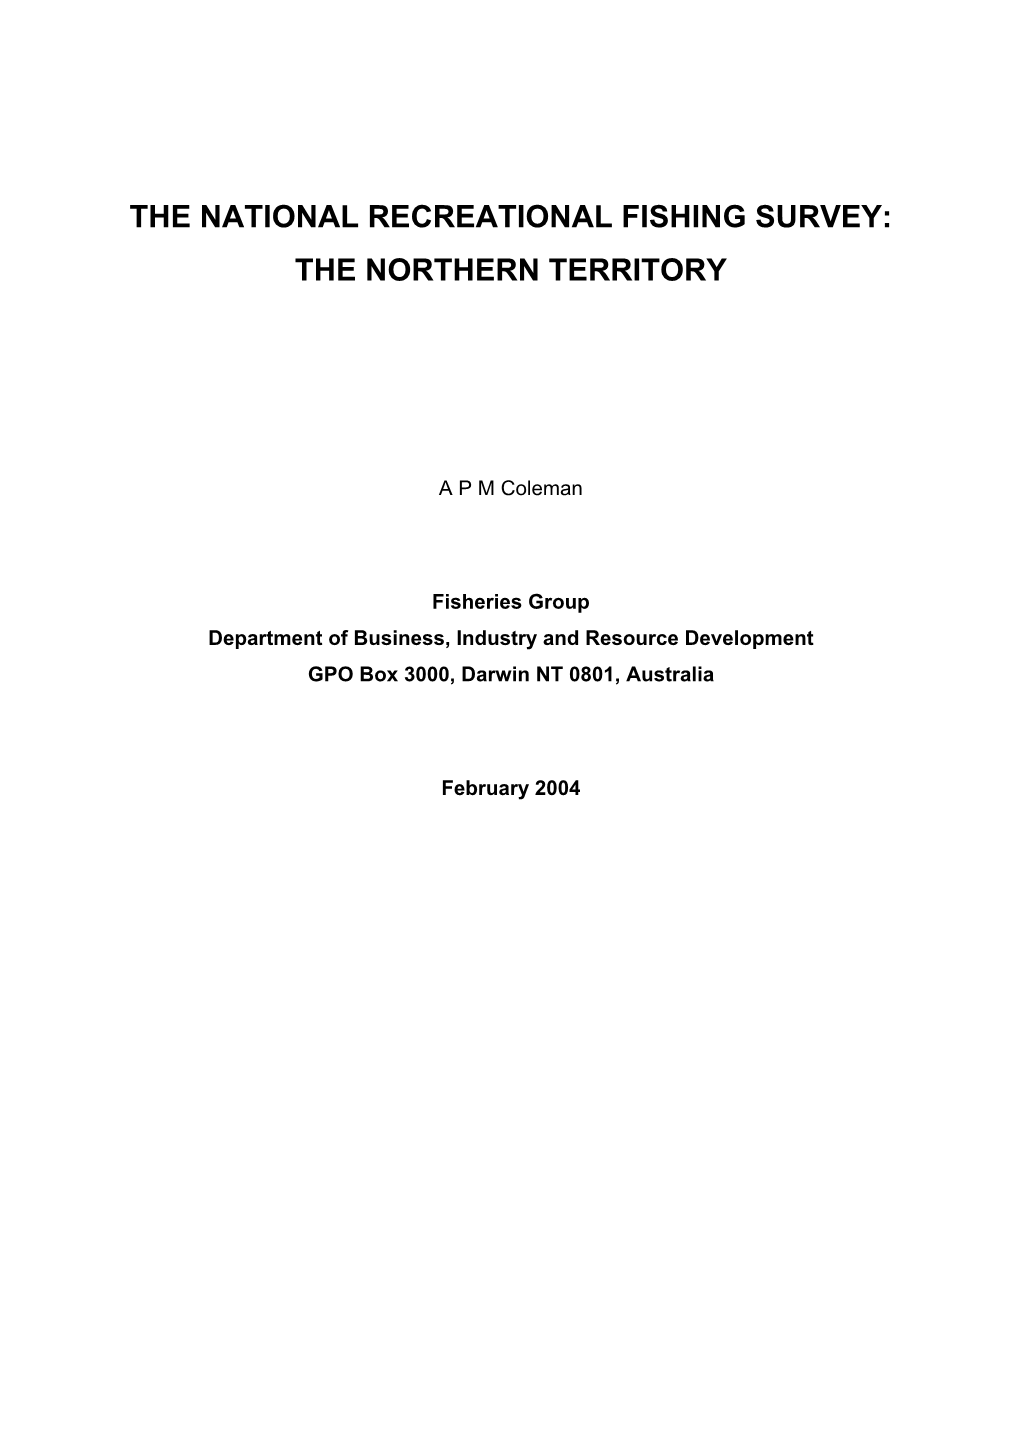 Coleman, APM 2004, the National Recreational Fishing Survey, Fishery Report 72, Northern Territory Department of Business